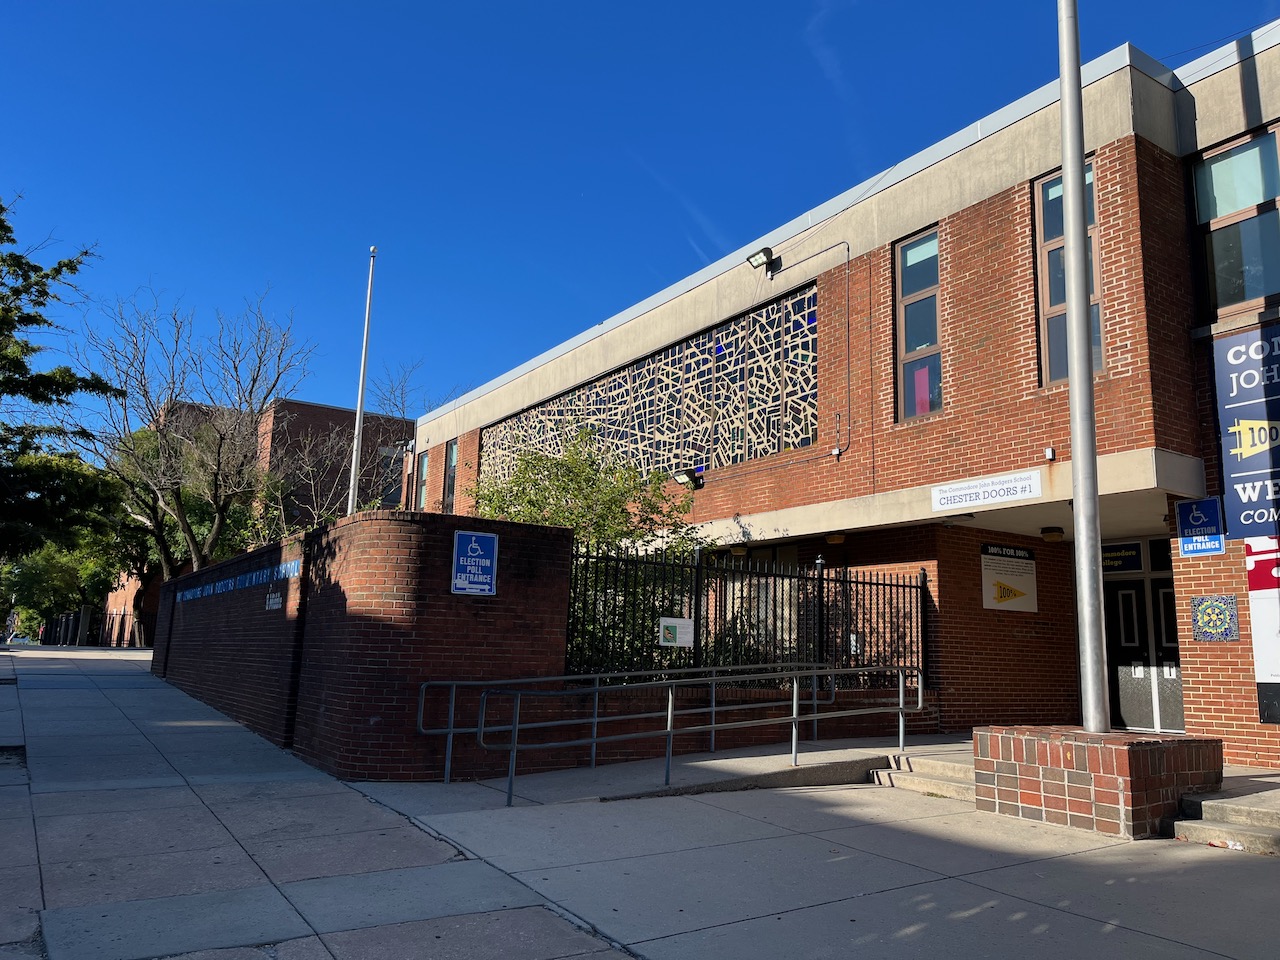 A modernist brick building with a large stained glass across the front, a flag pole next to an entrance on the right, and a low brick wall along the sidewalk on the left.